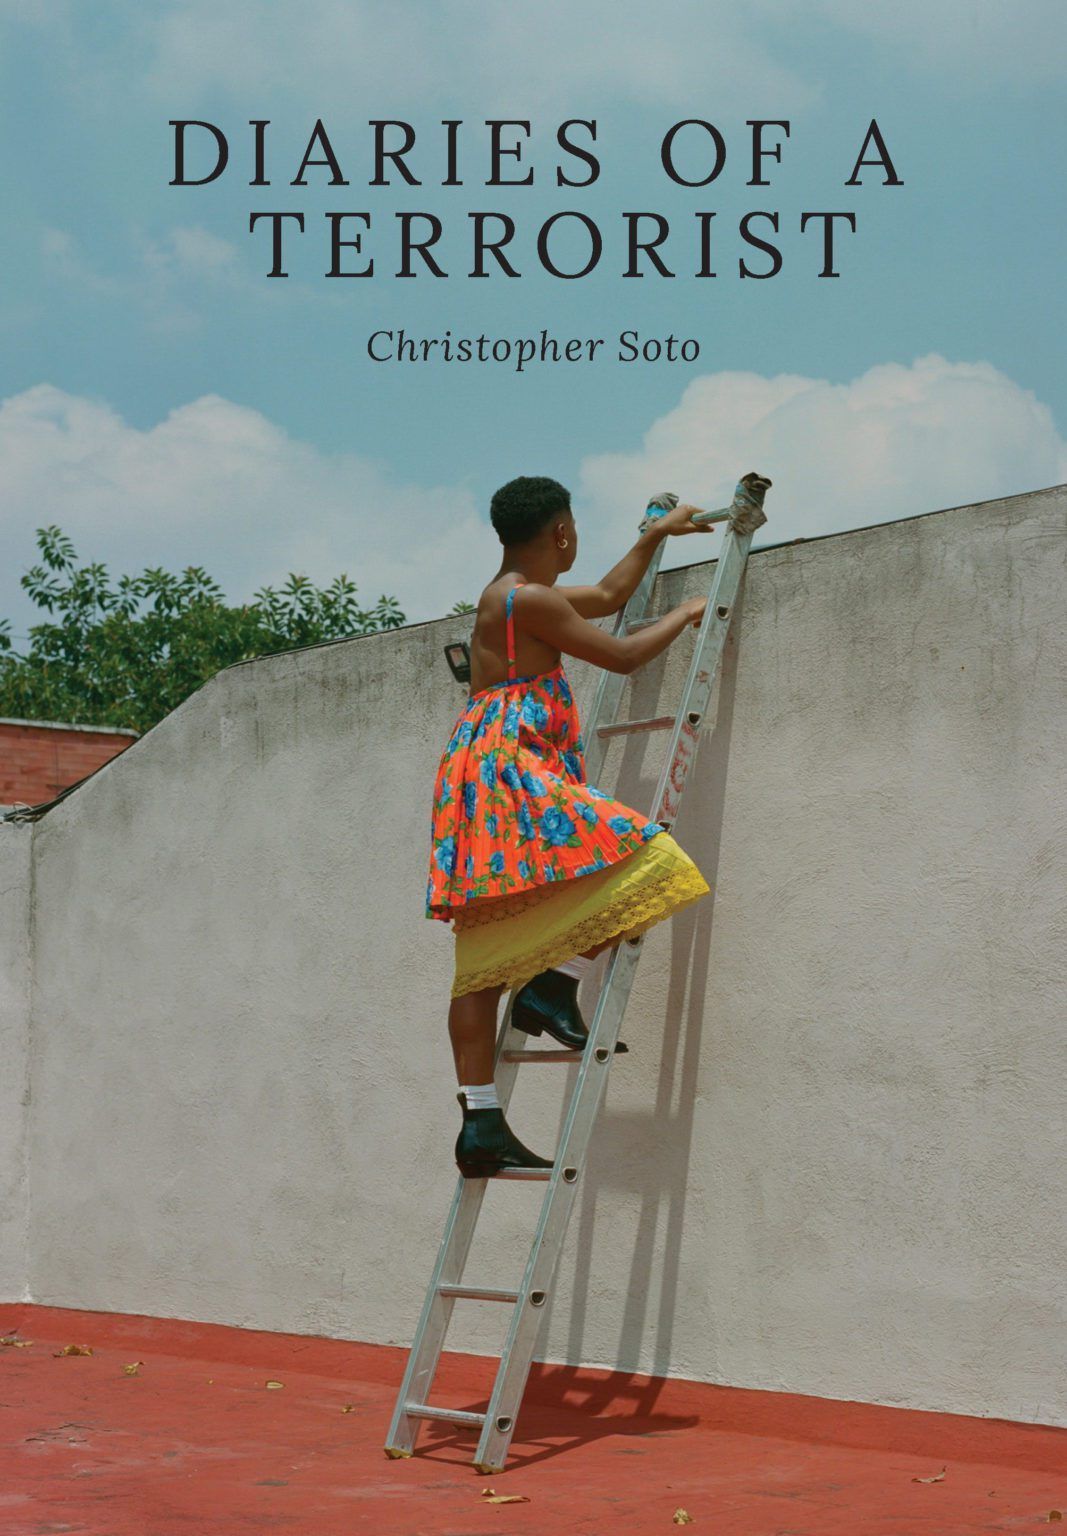 The Poetry of Revolt: On Christopher Soto’s “Diaries of a Terrorist”